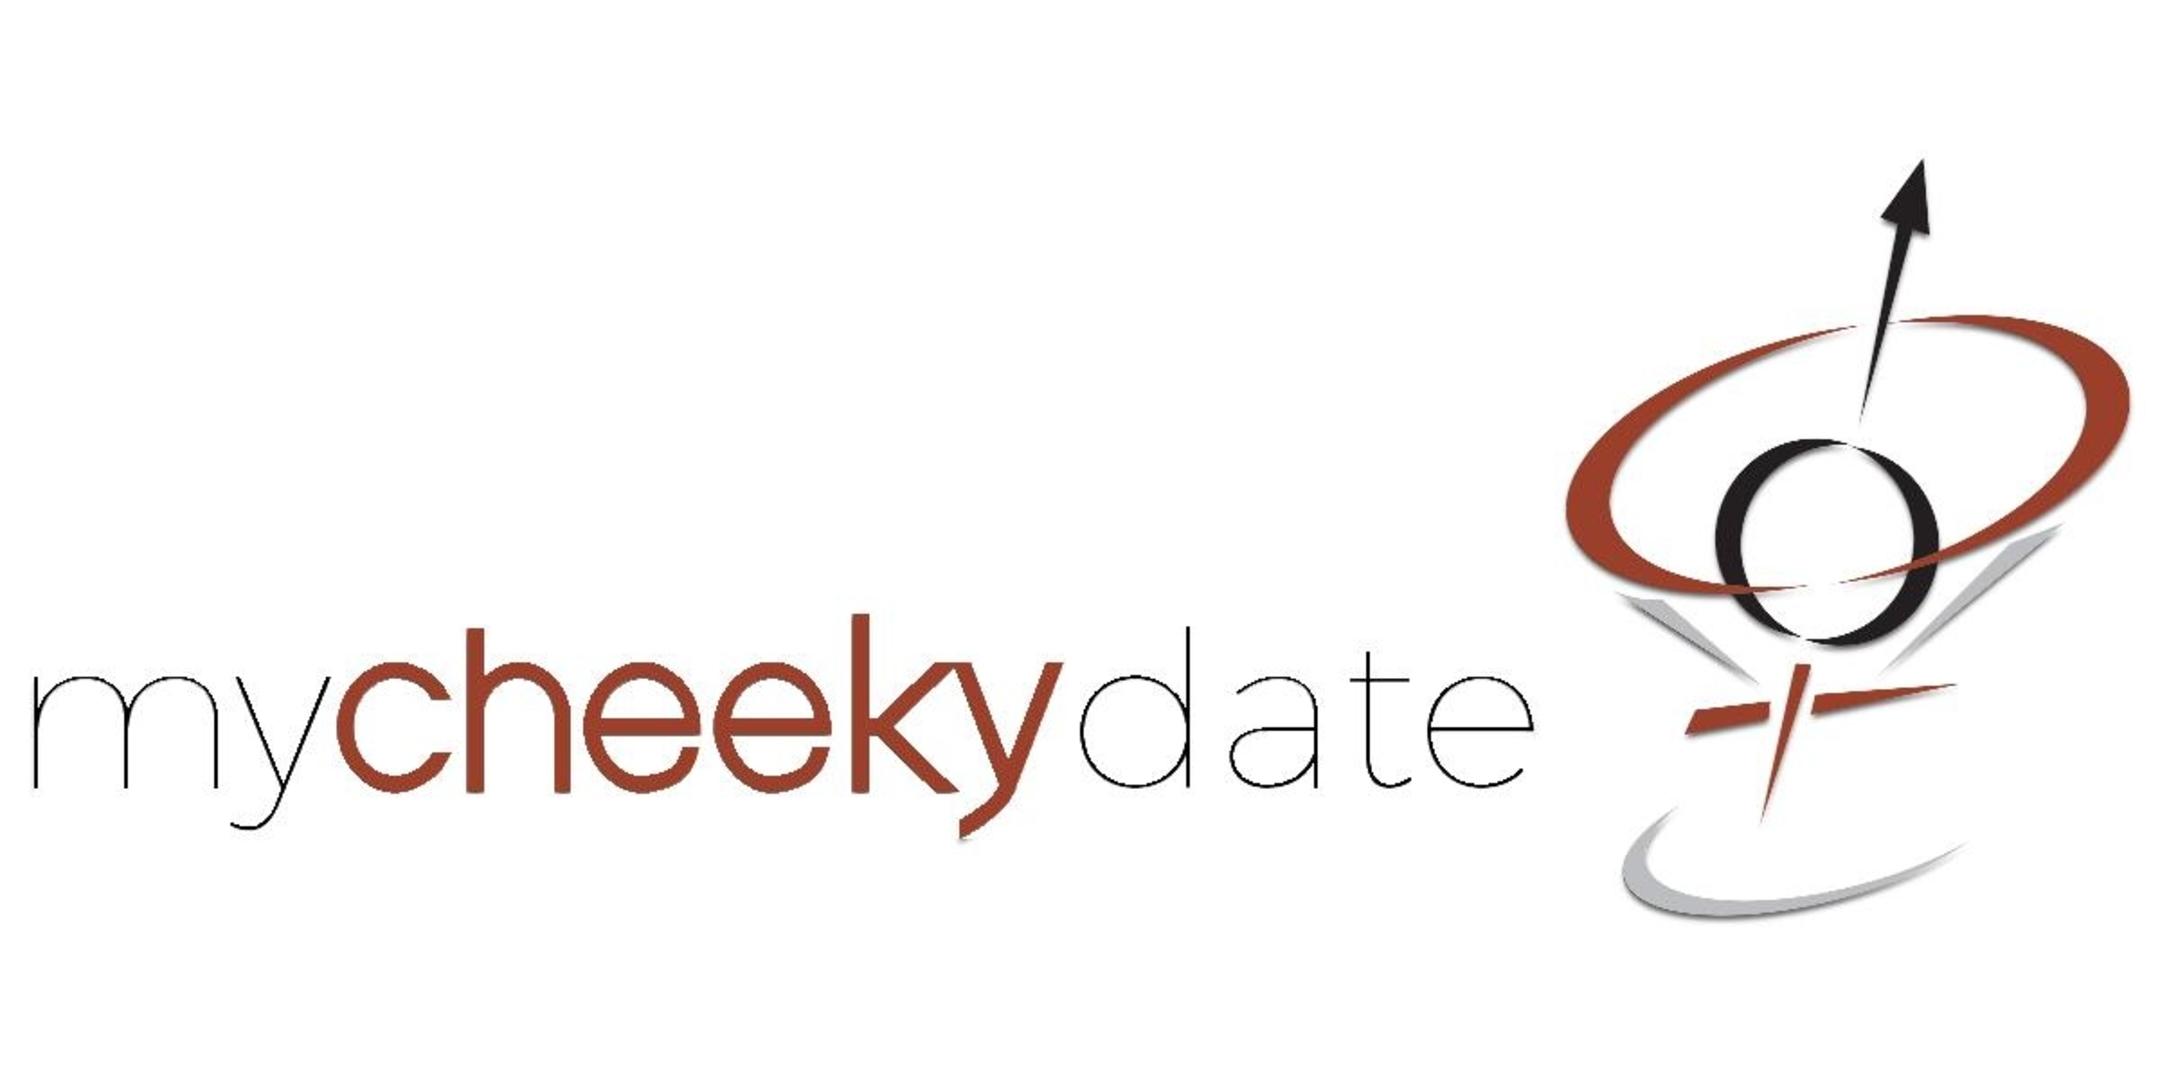 San Jose Singles Event | SpeedSanJose Dating | Let's Get Cheeky! | (Ages 26-38)